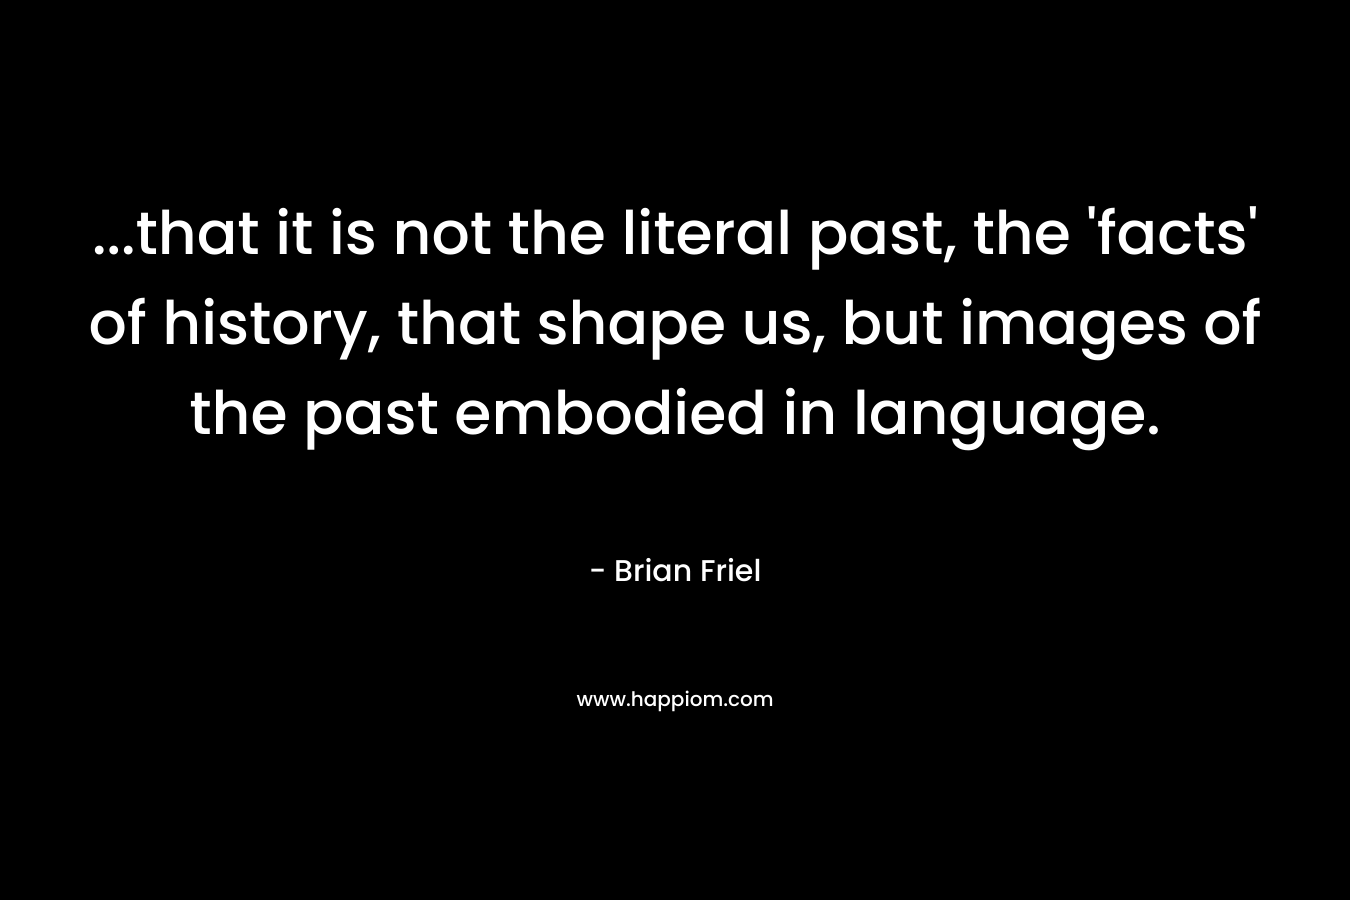 ...that it is not the literal past, the 'facts' of history, that shape us, but images of the past embodied in language.